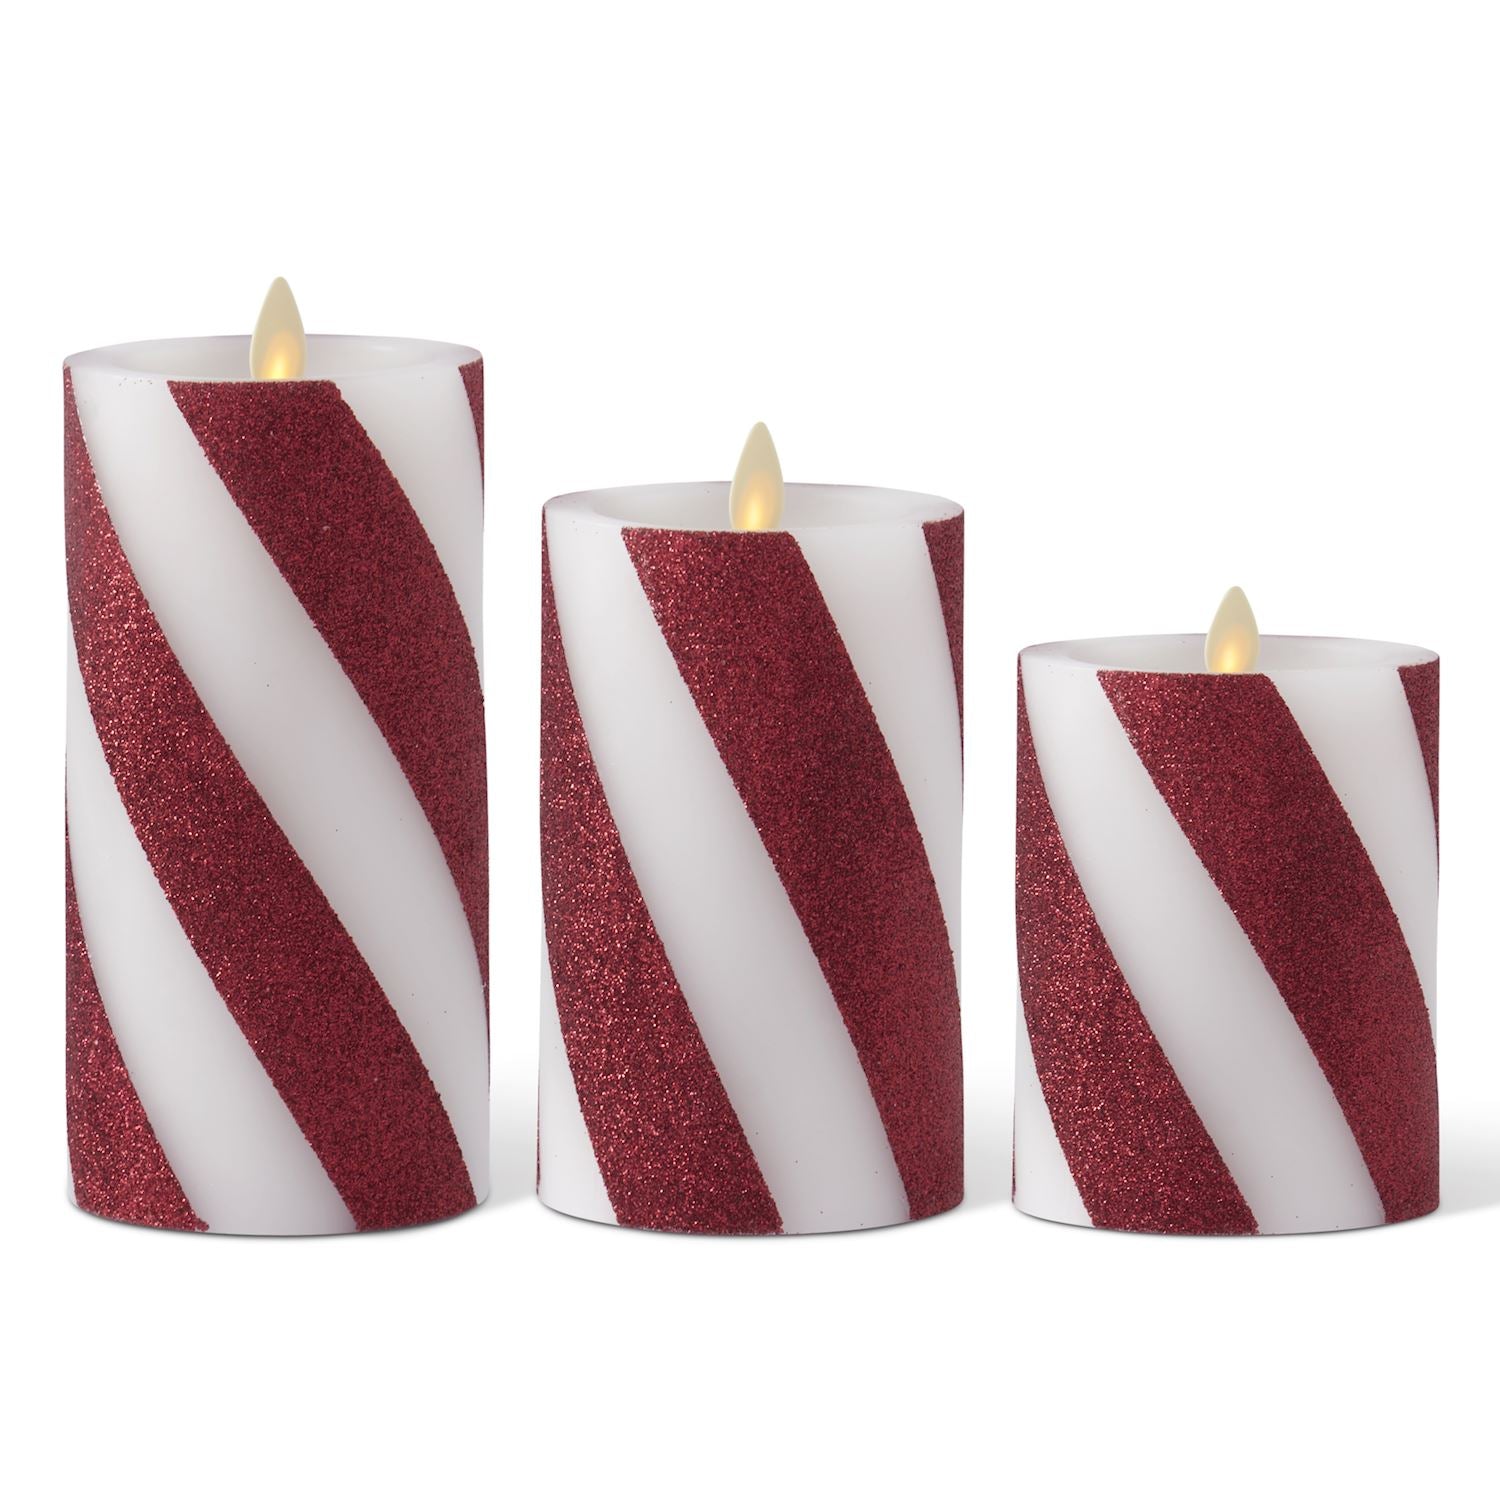 THICK CANDY STRIPED WAX LUMINARA INDOOR PILLAR CANDLE W/RE